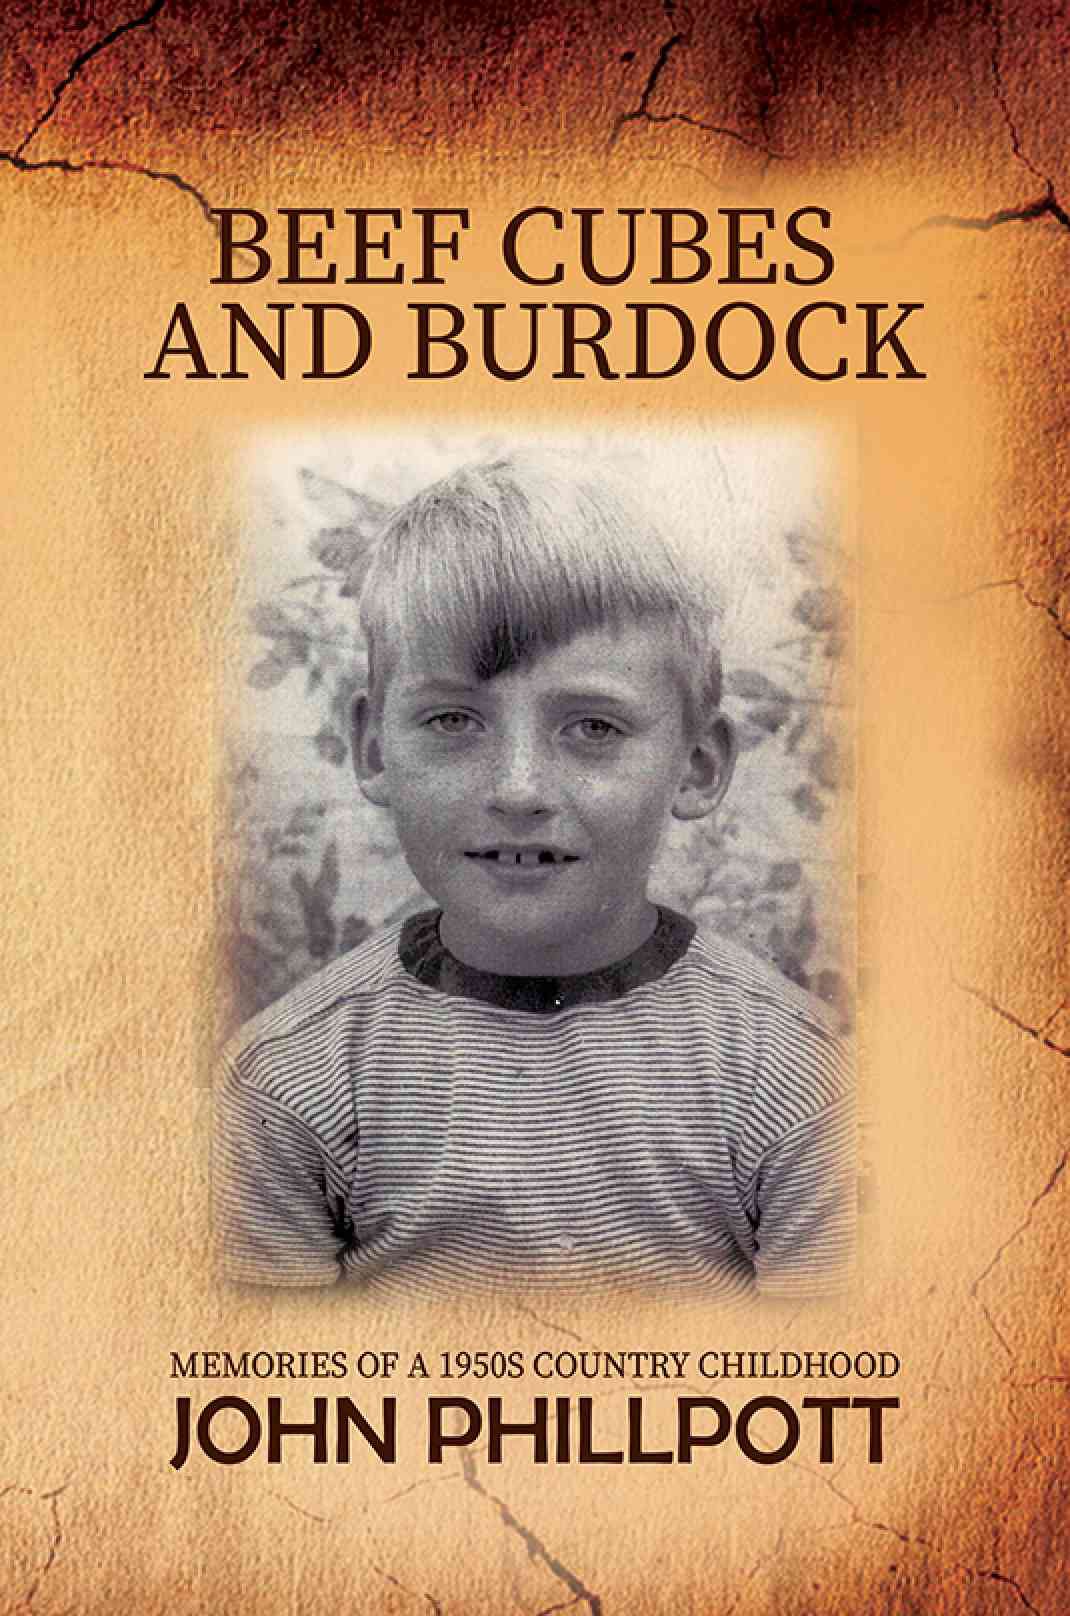 Tudor House Museum hosts Book Signing event of ‘Beef Cubes and Burdock’